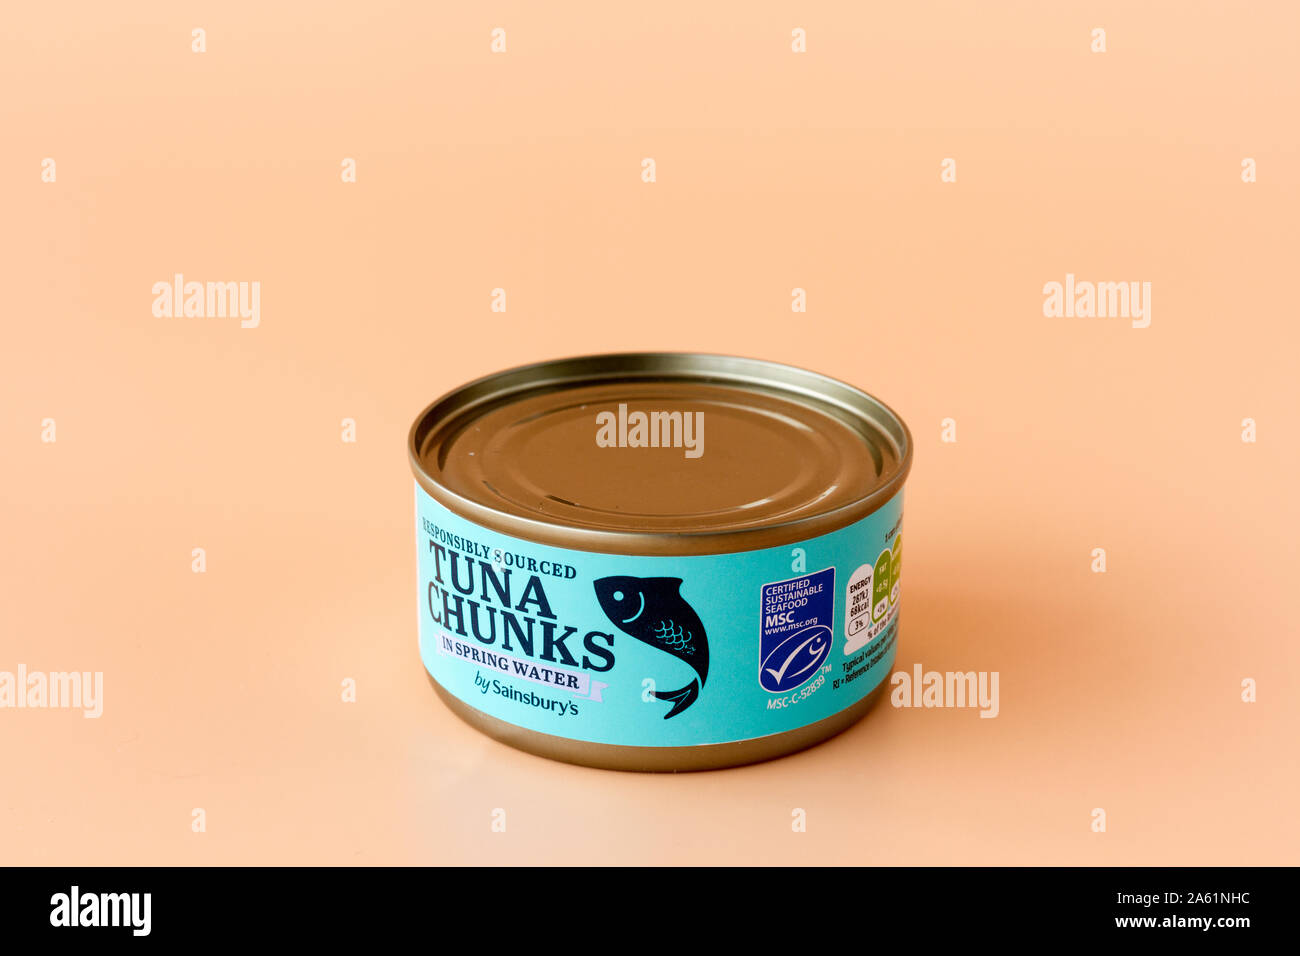 Small tin of responsibly sourced tuna chunks by Sainsbury's. MSC label Stock Photo